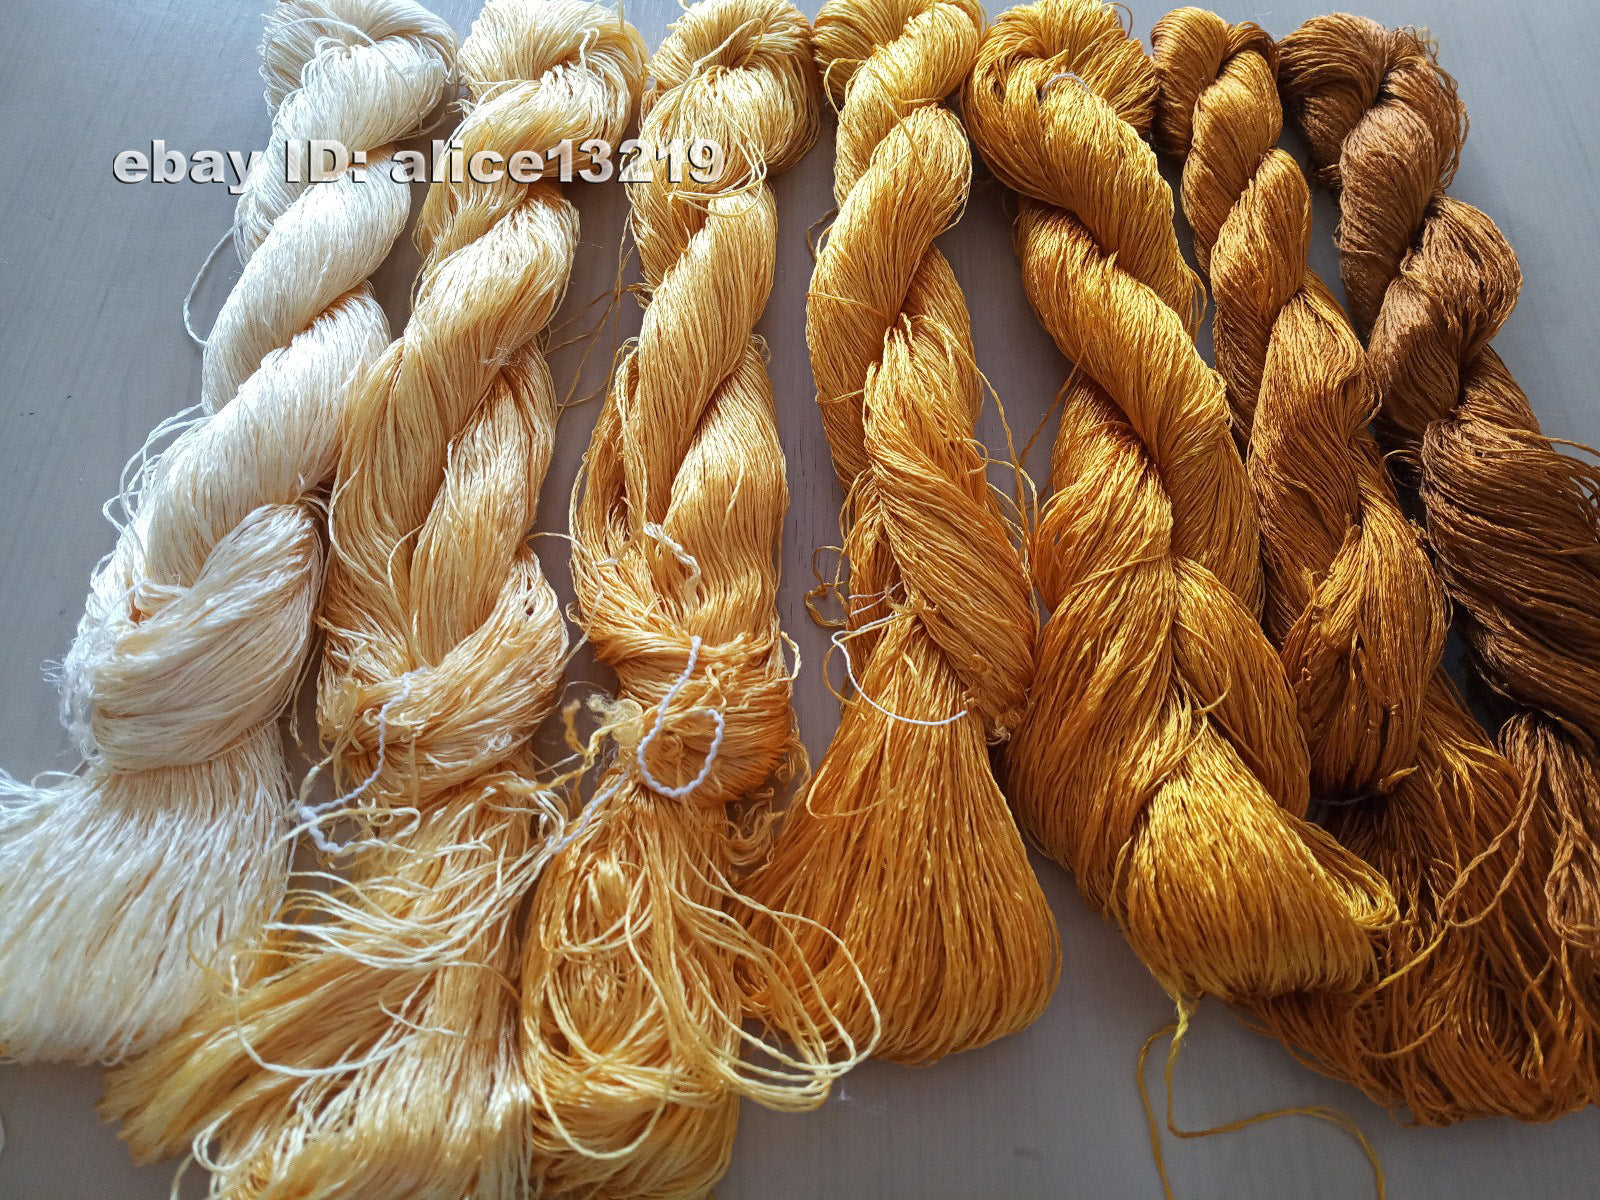 7bundles 100%real mulberry silk,hand-dyed embroidery silk floss/thread N51